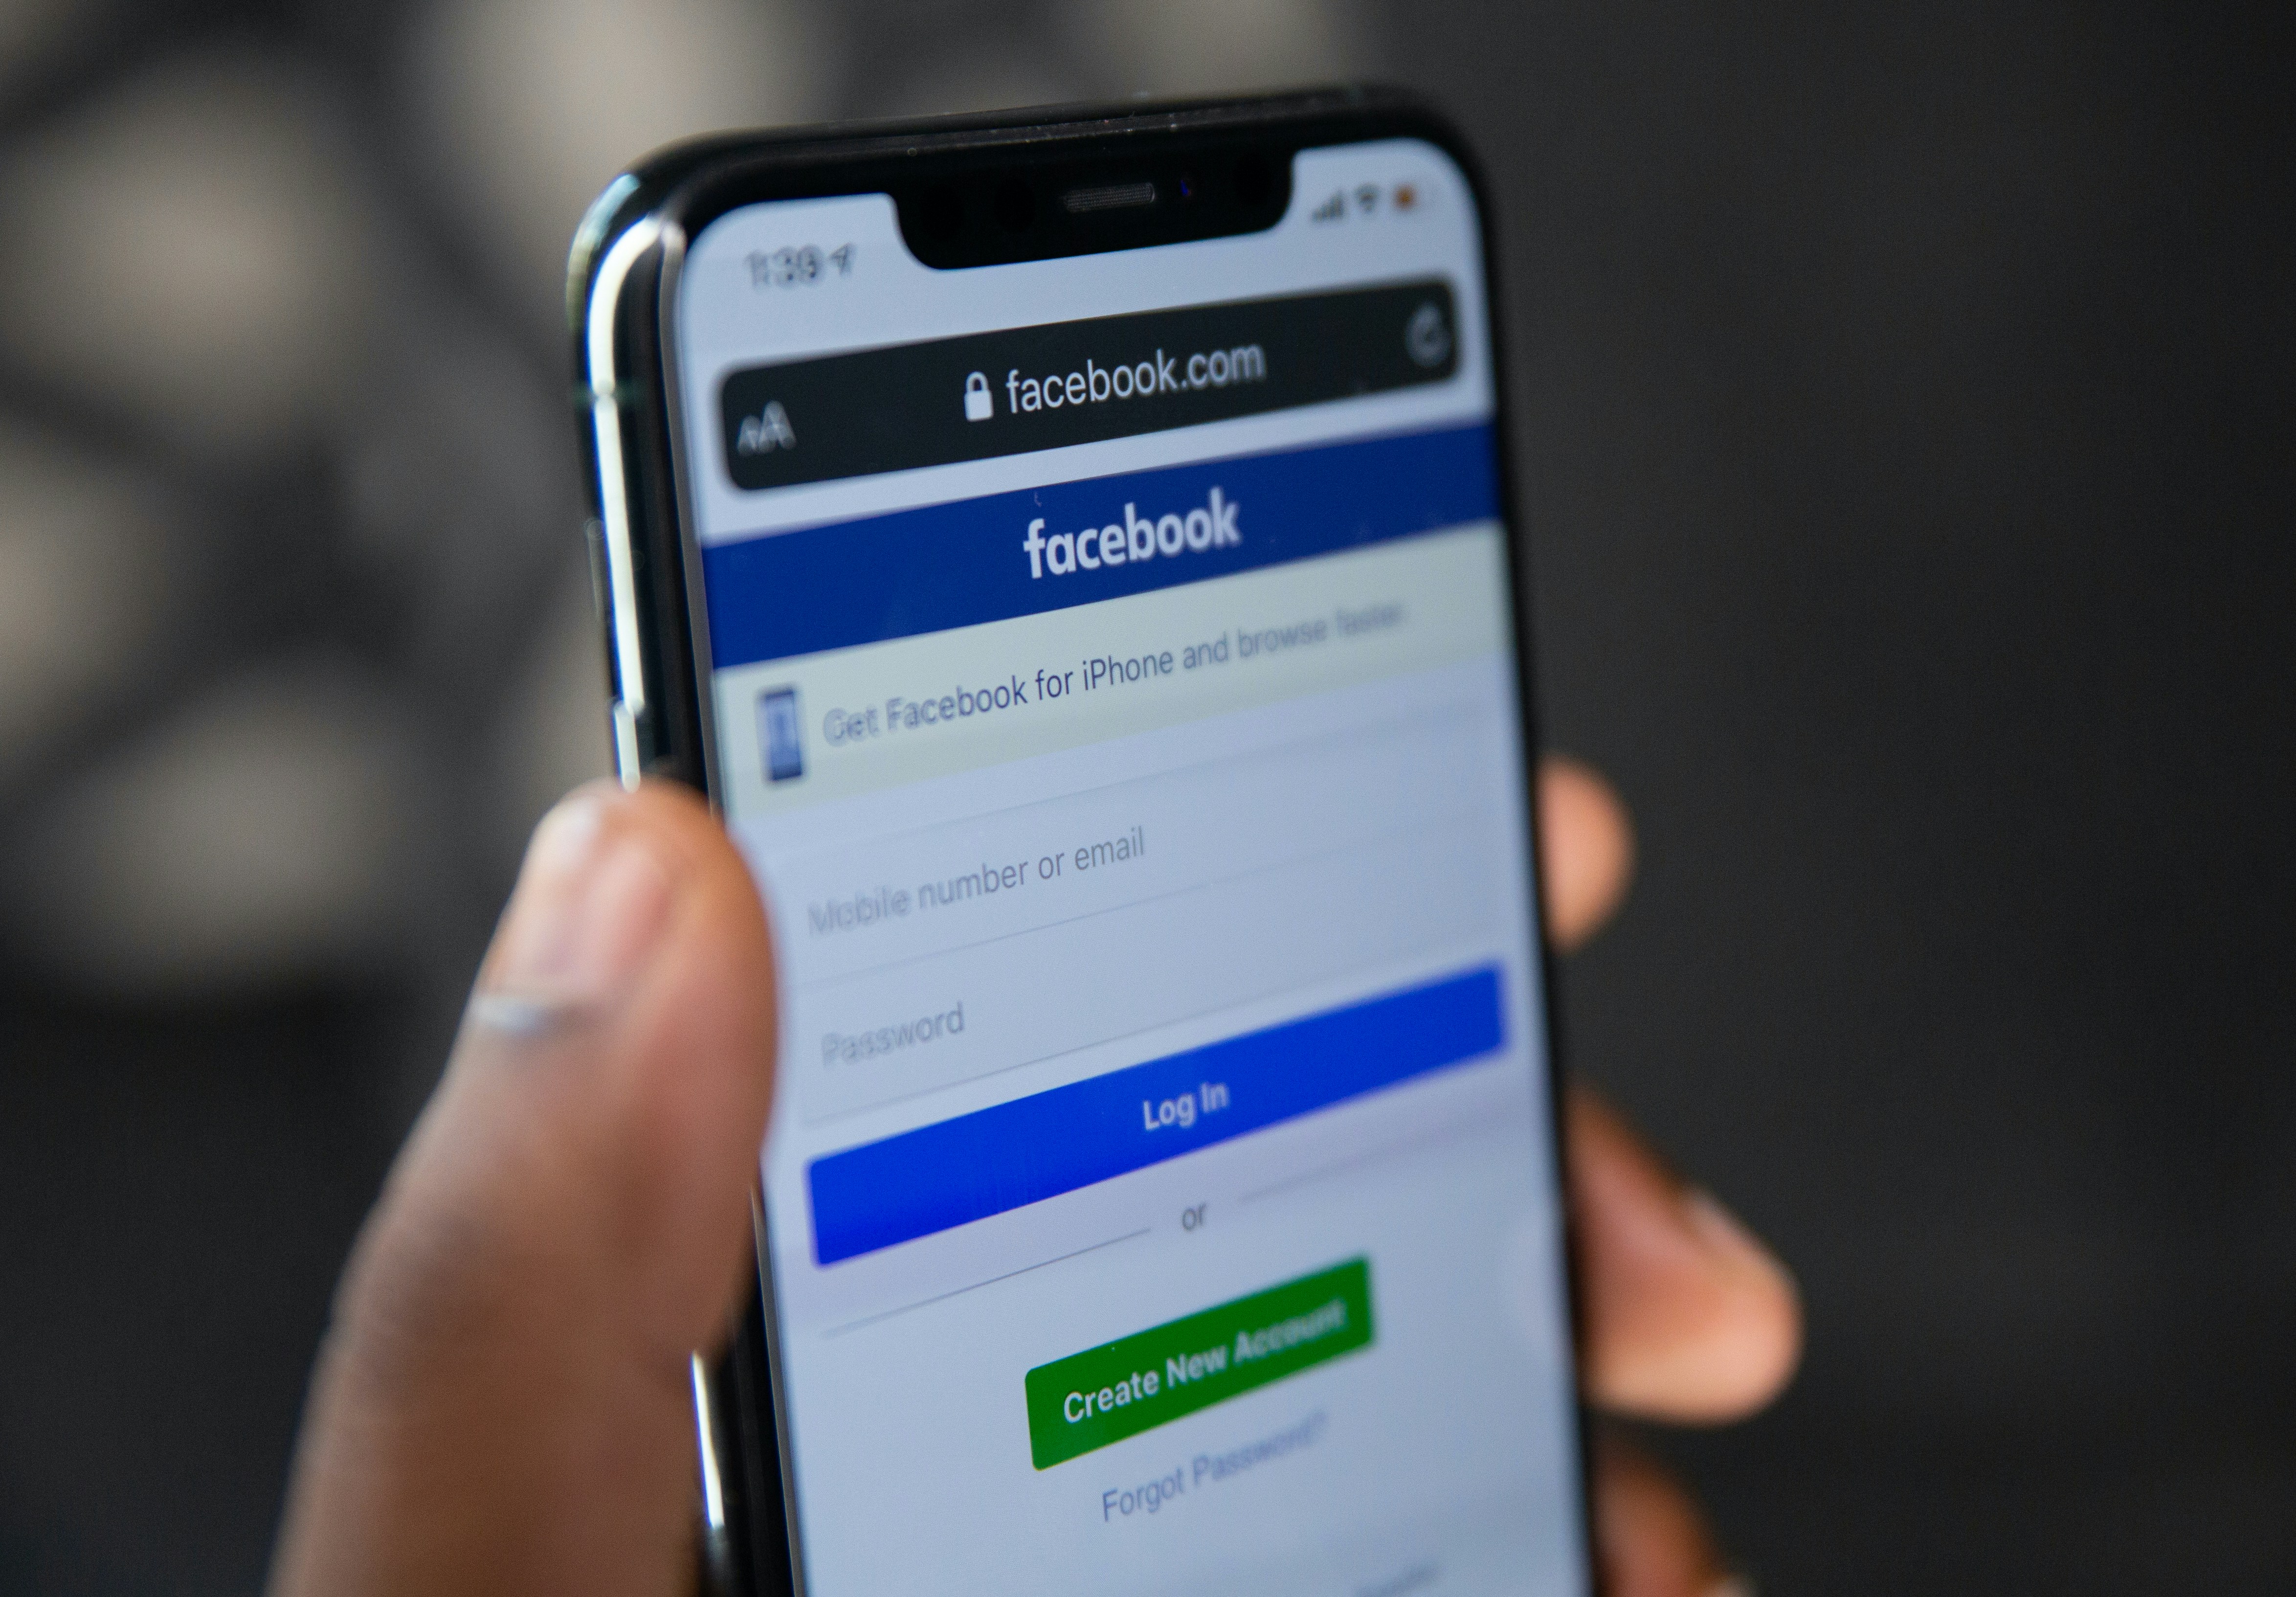 A phone with Facebook app open on it | Source: Unsplash